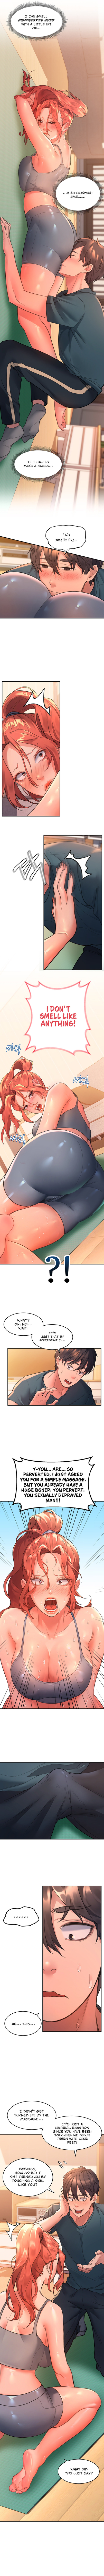 Unlock Her Heart - Chapter 4 Page 6